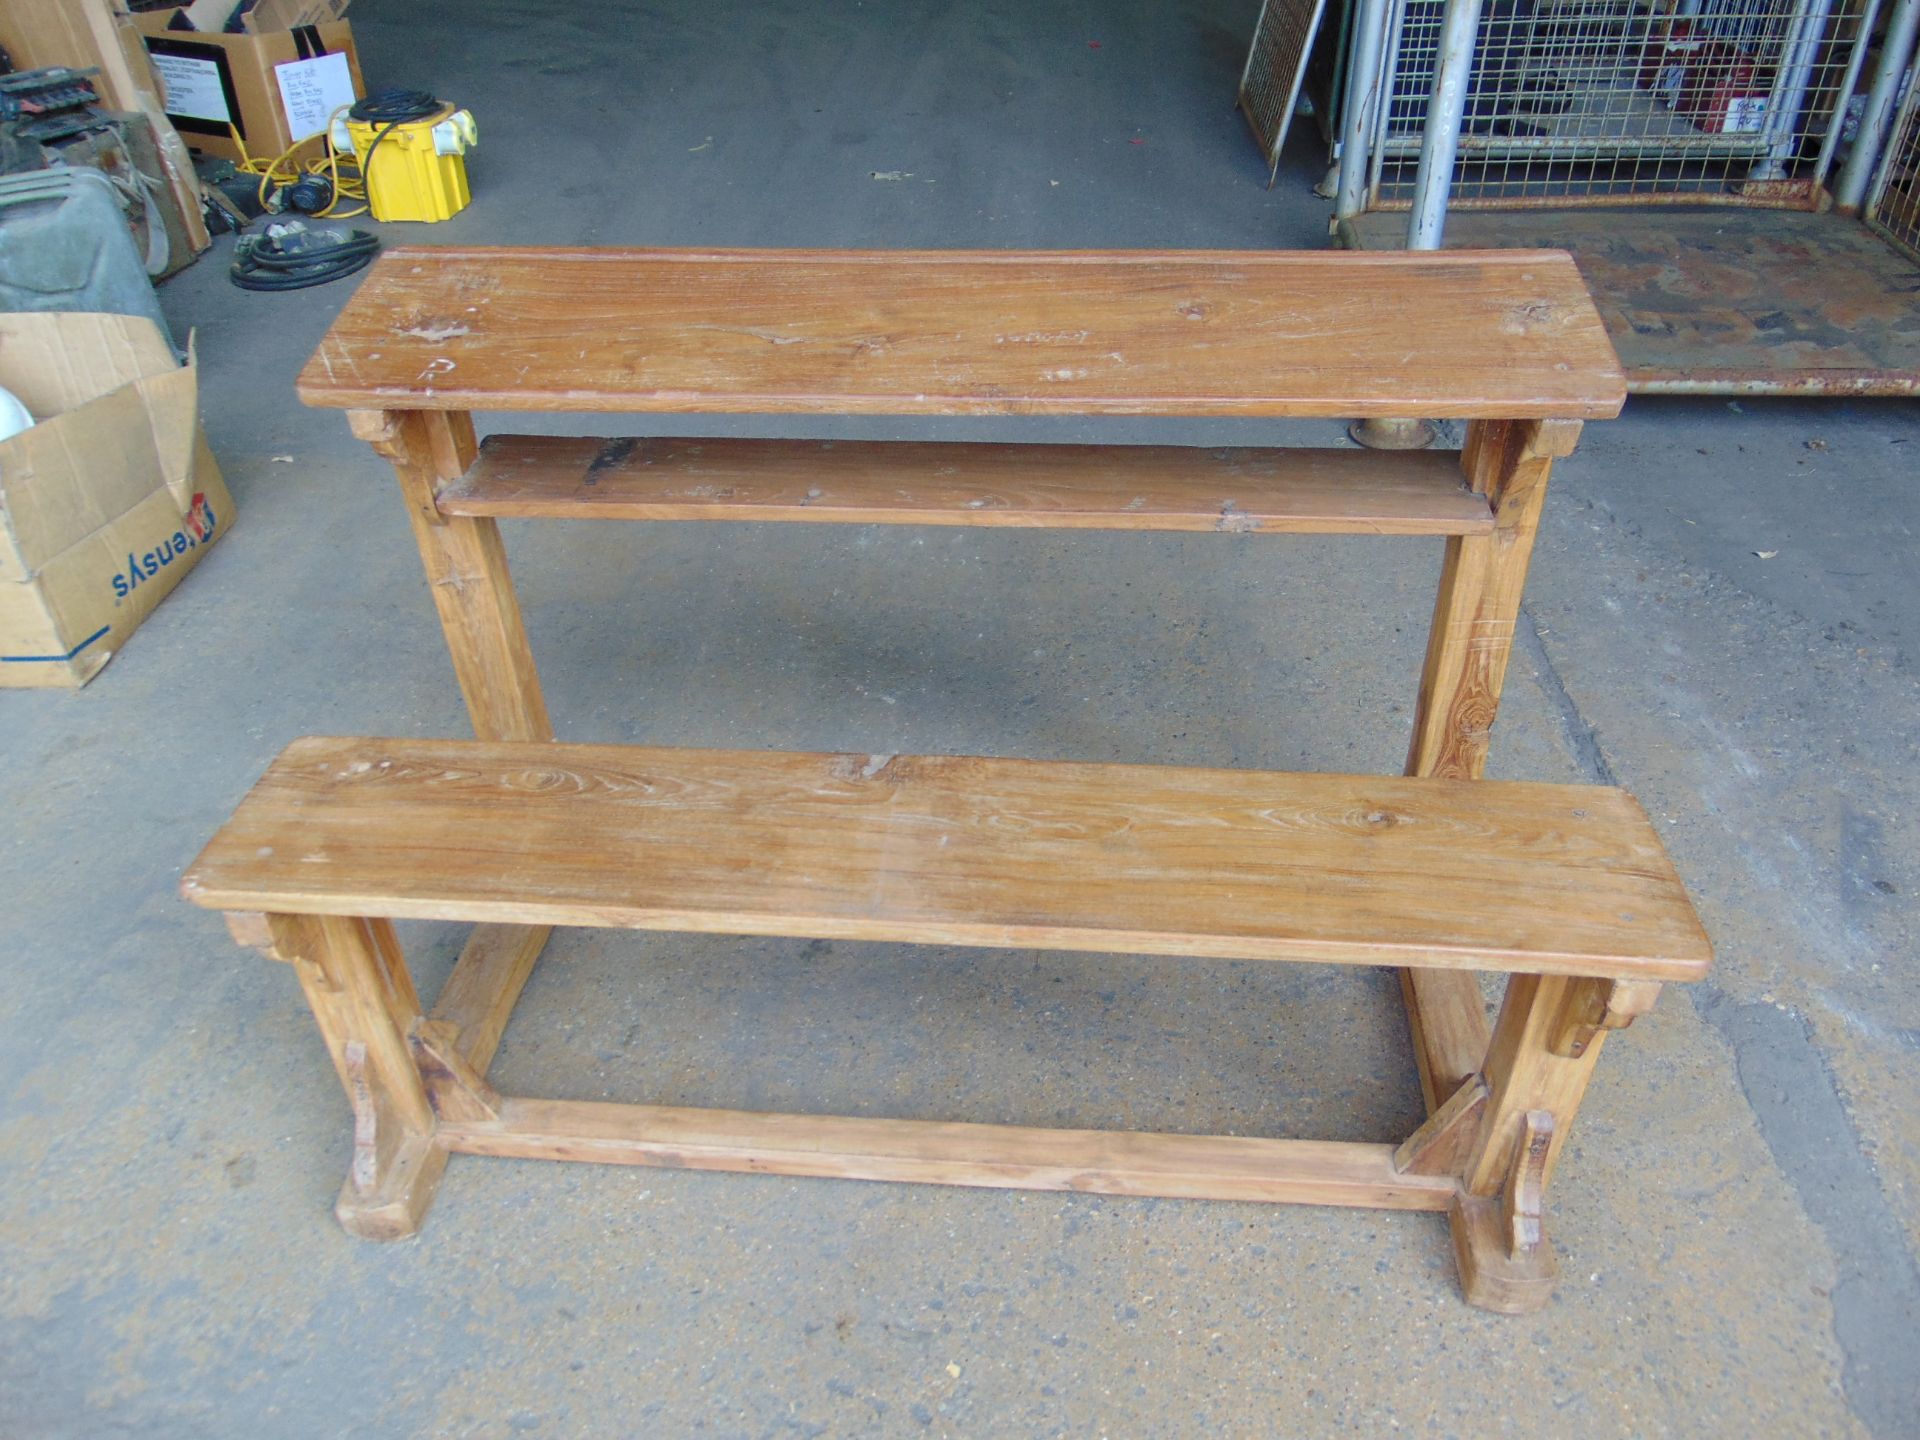 Antique Traditional Wooden School Bench Desk - Image 2 of 7